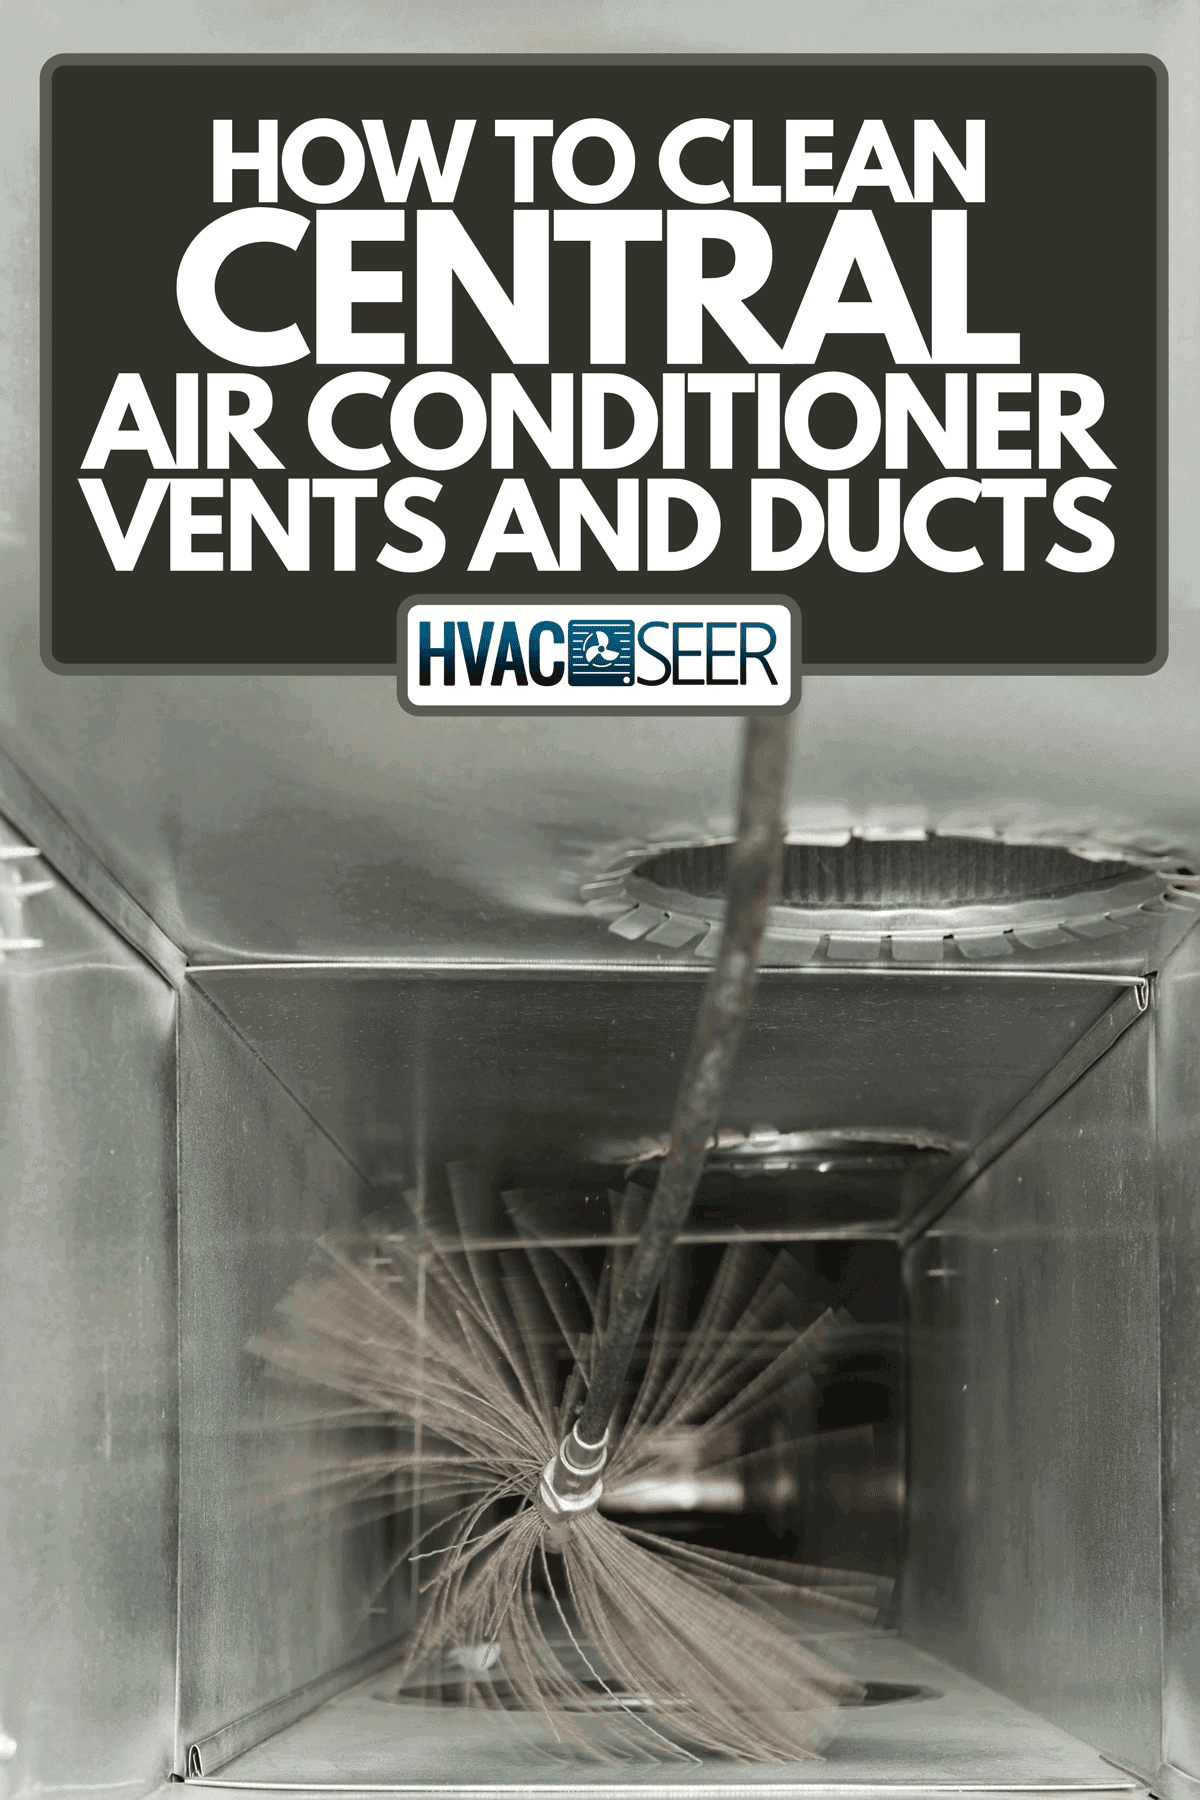 A residential HVAC duct cleaning with a power brush, How To Clean Central Air Conditioner Vents And Ducts